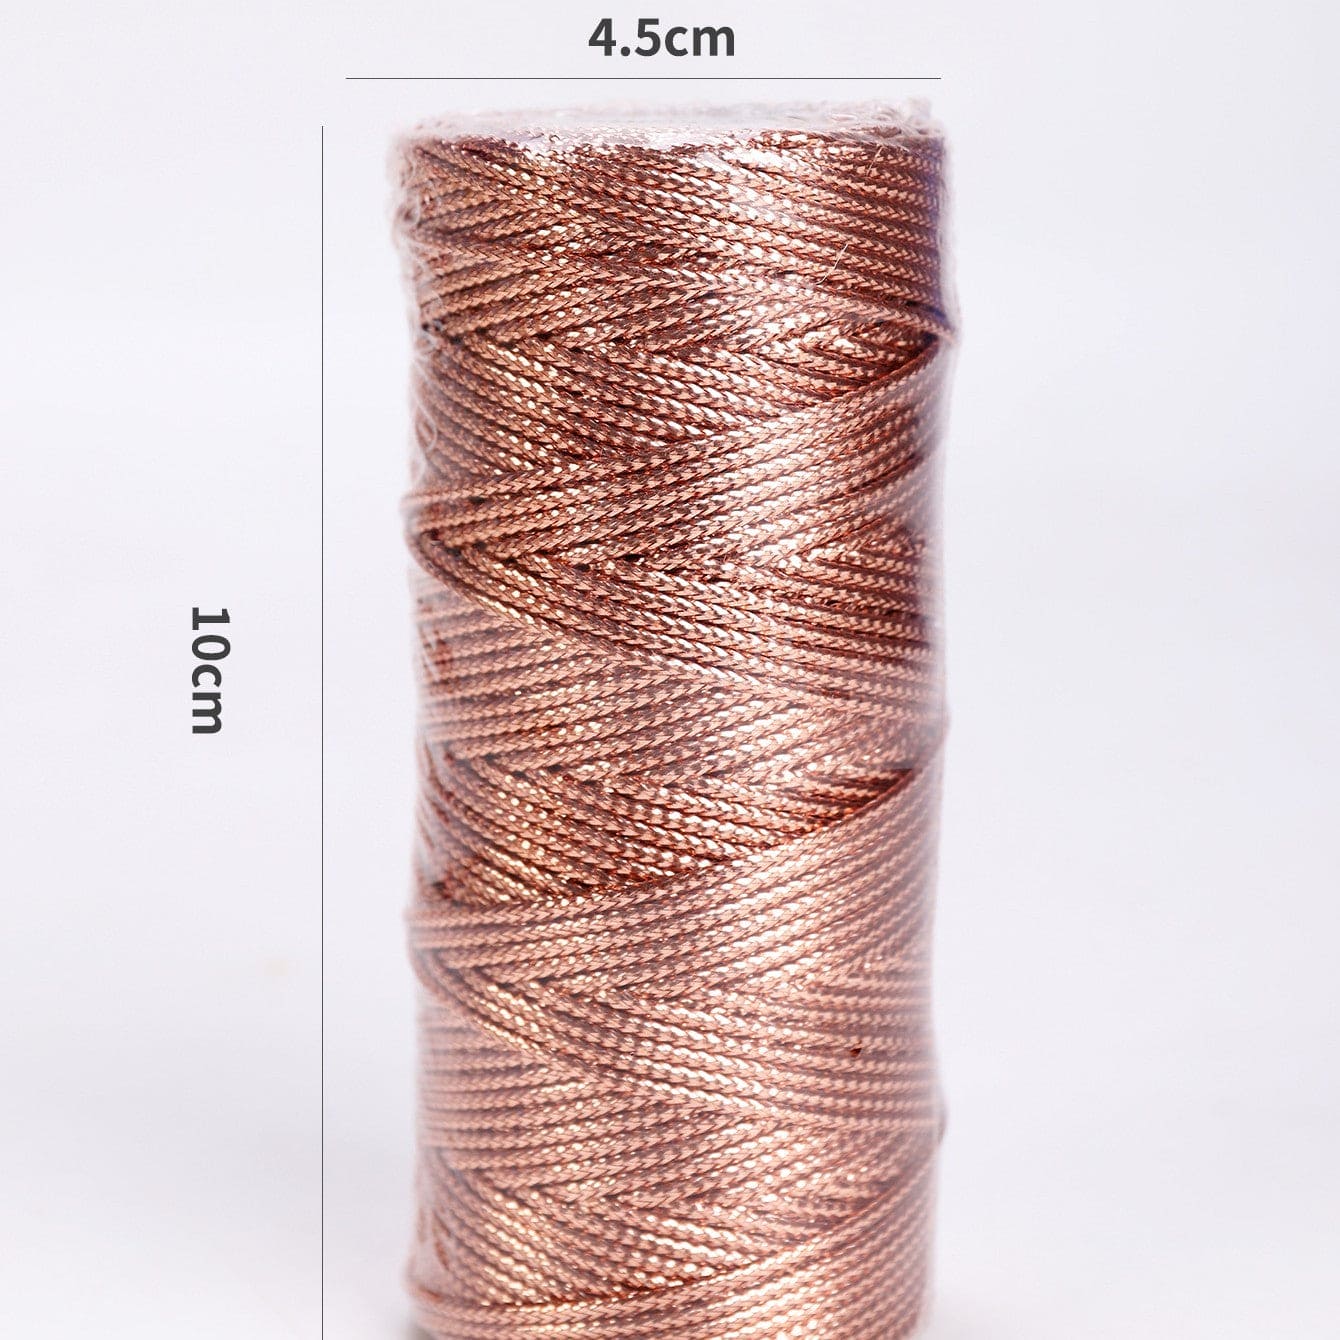 16 Strands Flat Hollow Gold Wire Non-stretch Gift Wrapping Wire